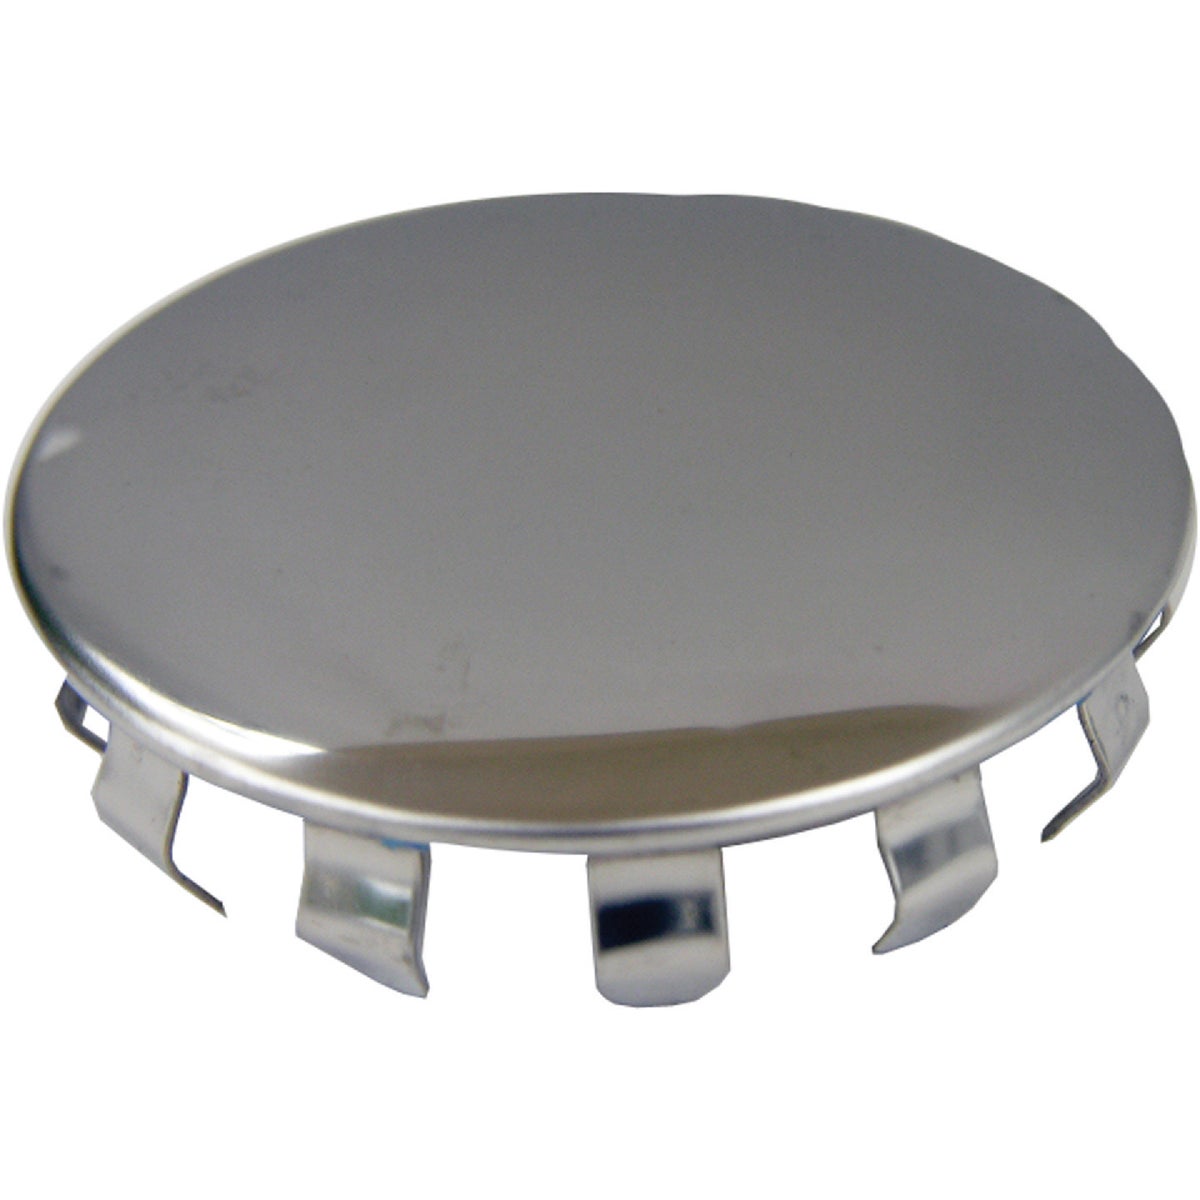 Lasco 1-1/2 In. Stainless Steel Snap-In Faucet Cover